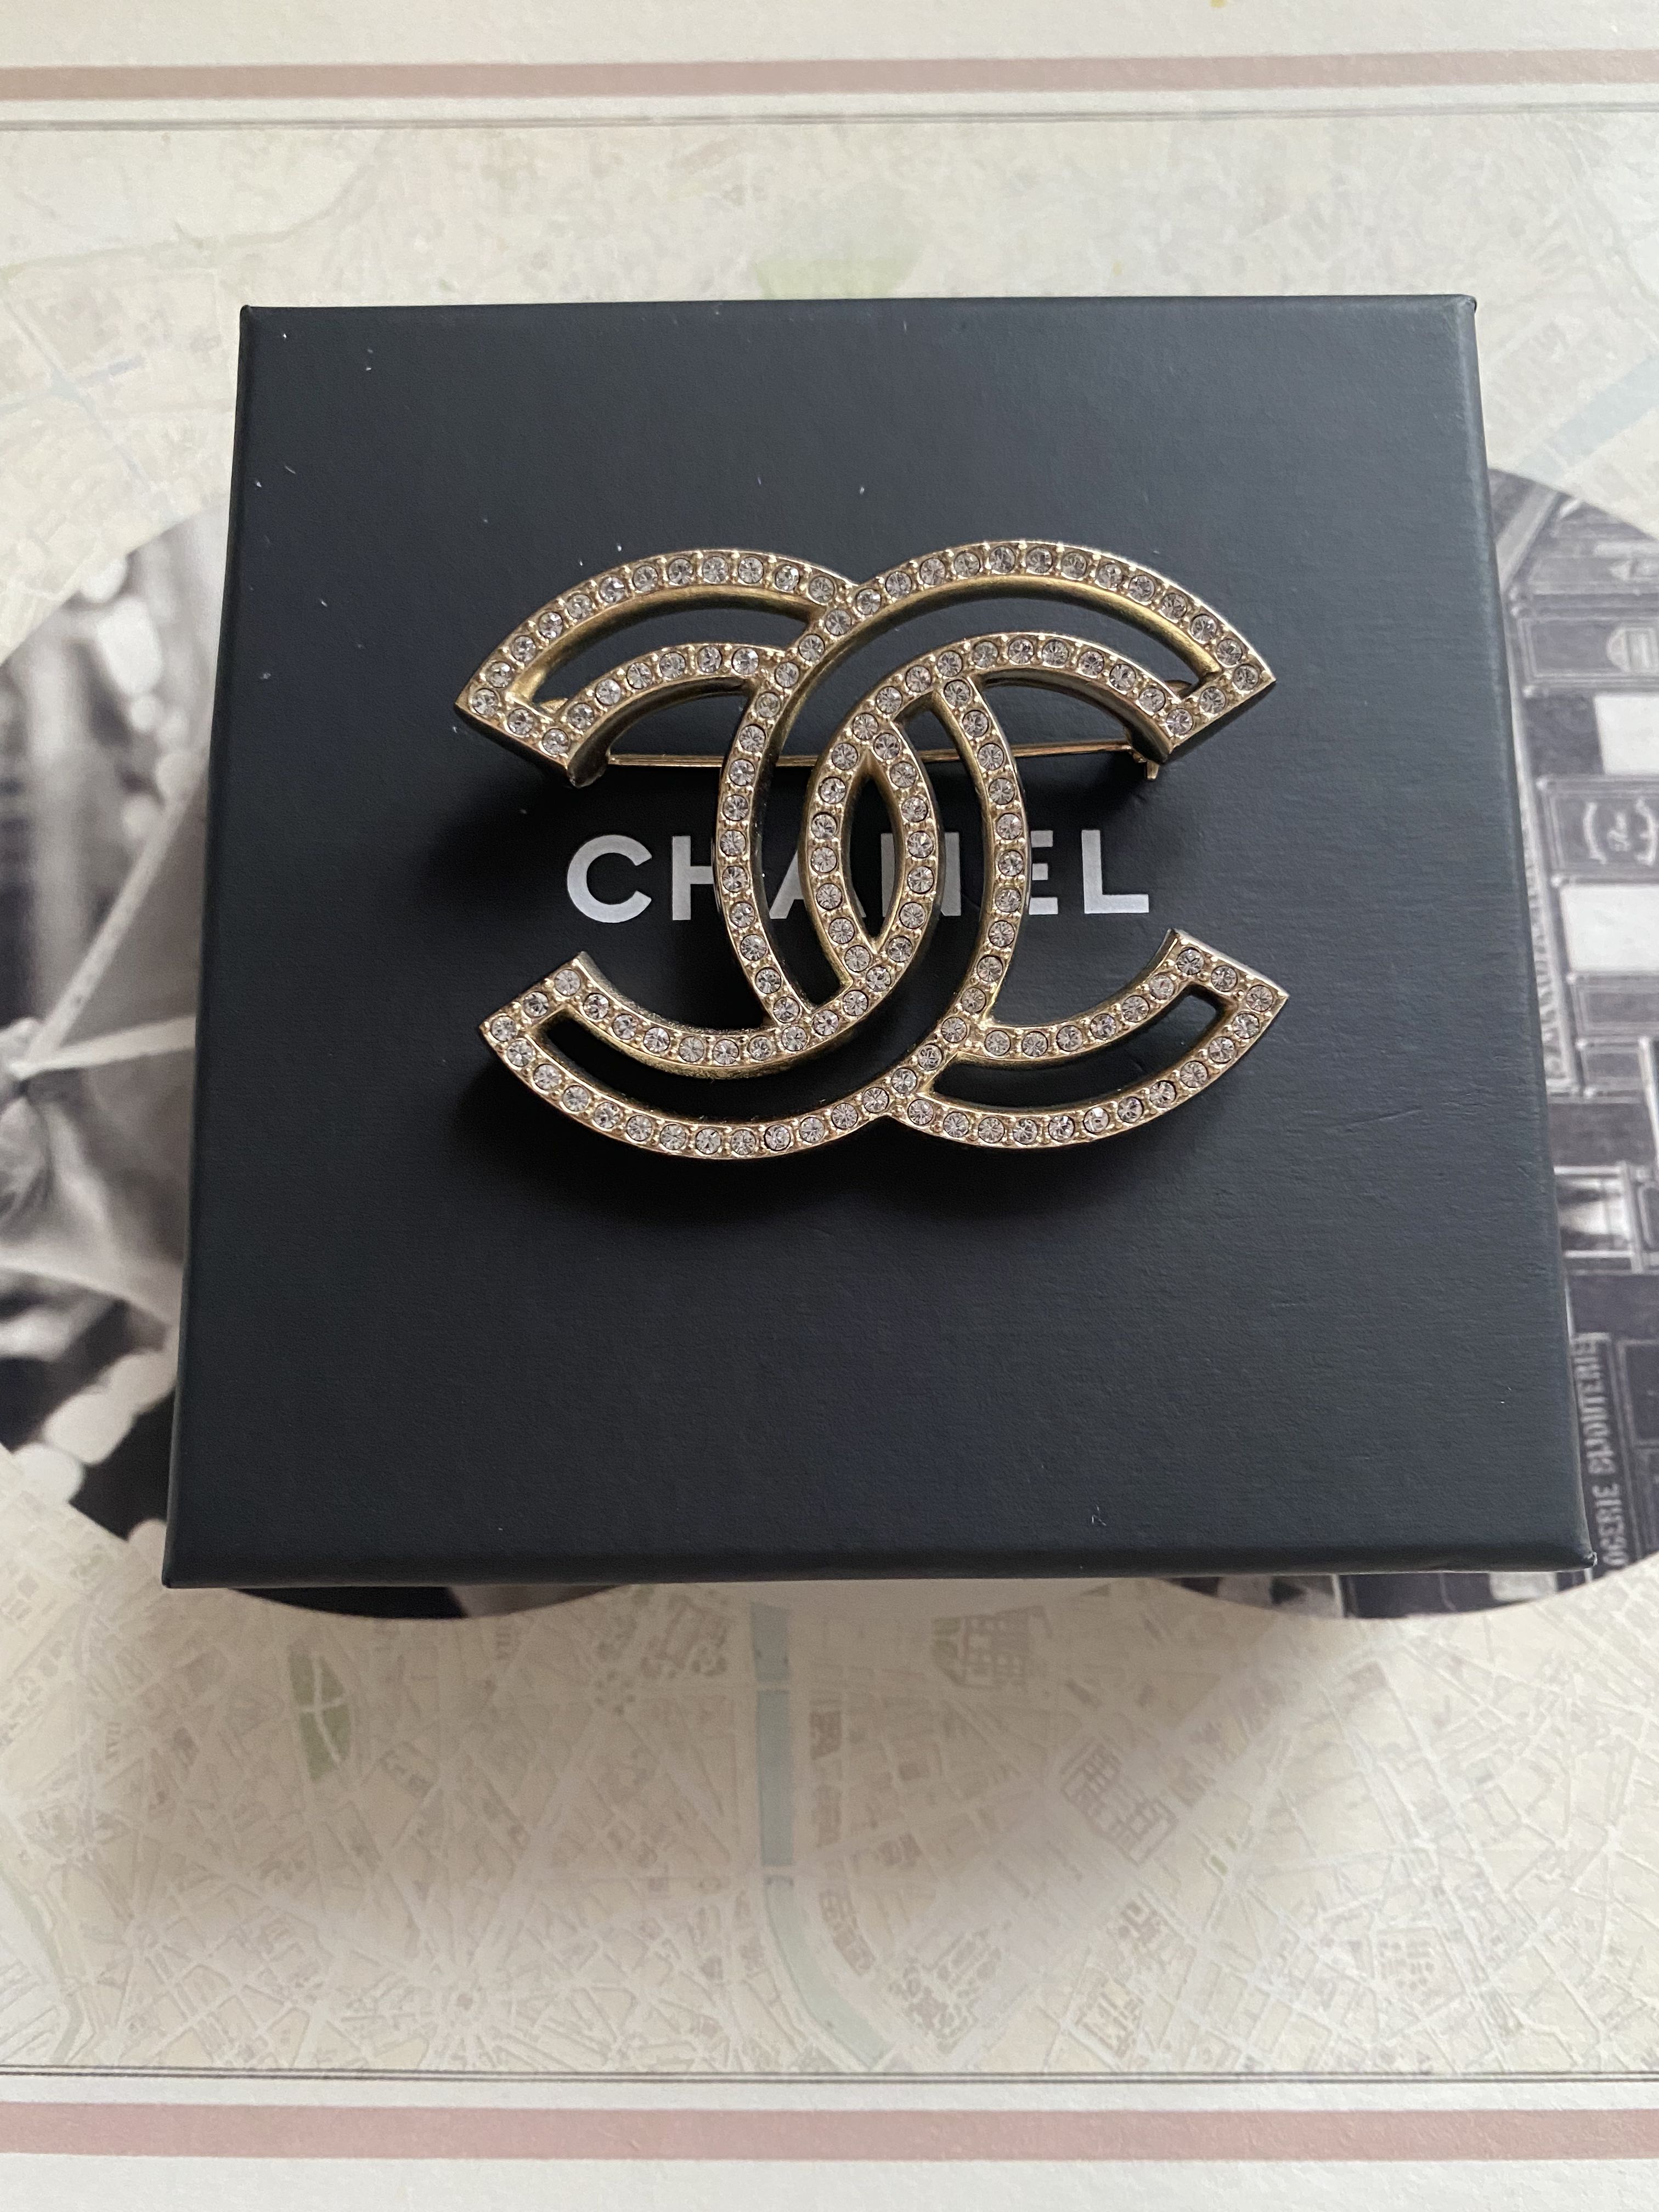 Base Metal & Strass Chanel Costume Double Logo Brooch by WP